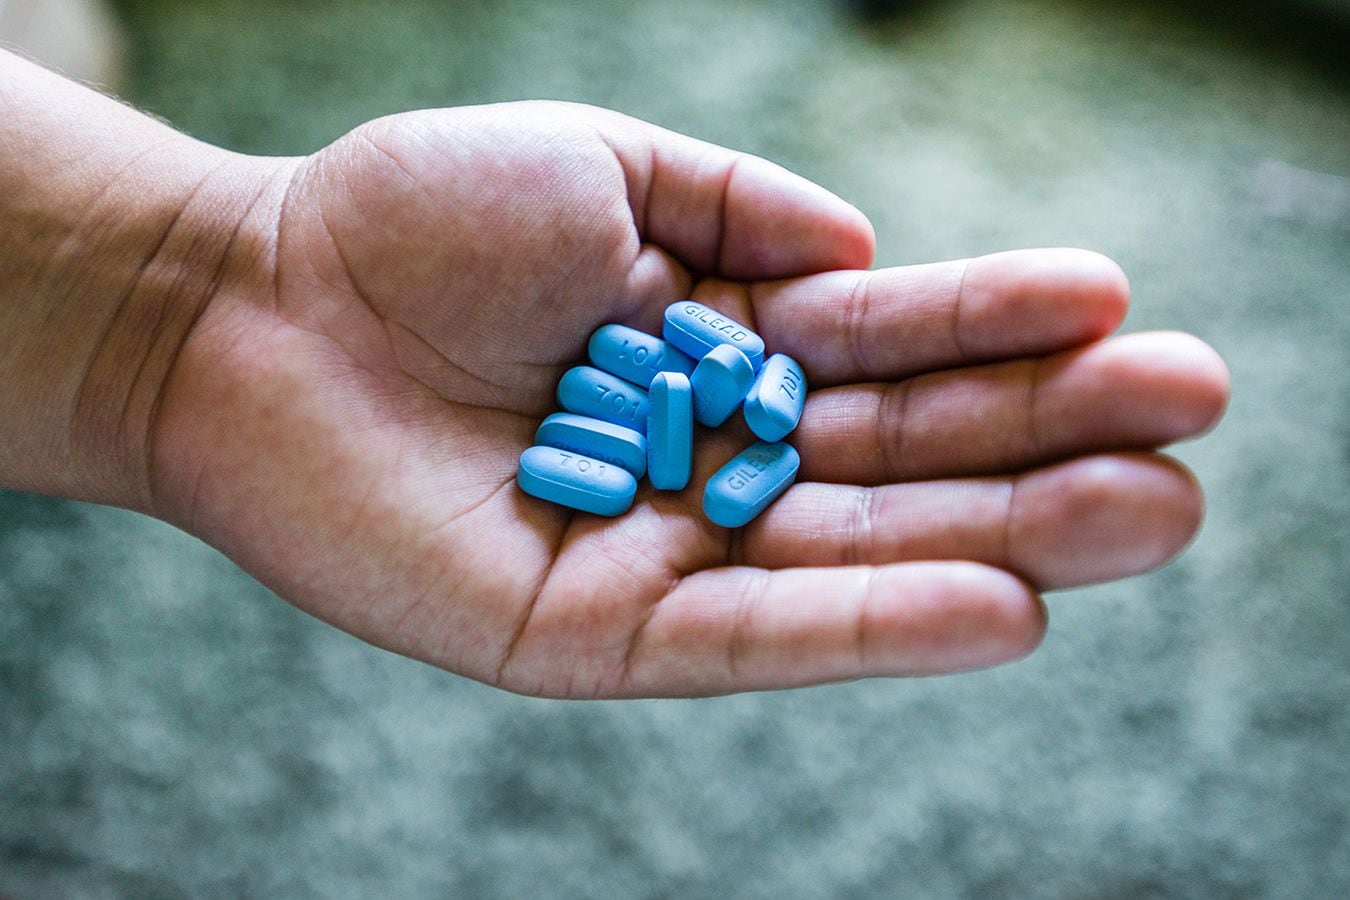 Truvada is one of two PrEP medications, along with Descovy, manufactured by Gilead Sciences...